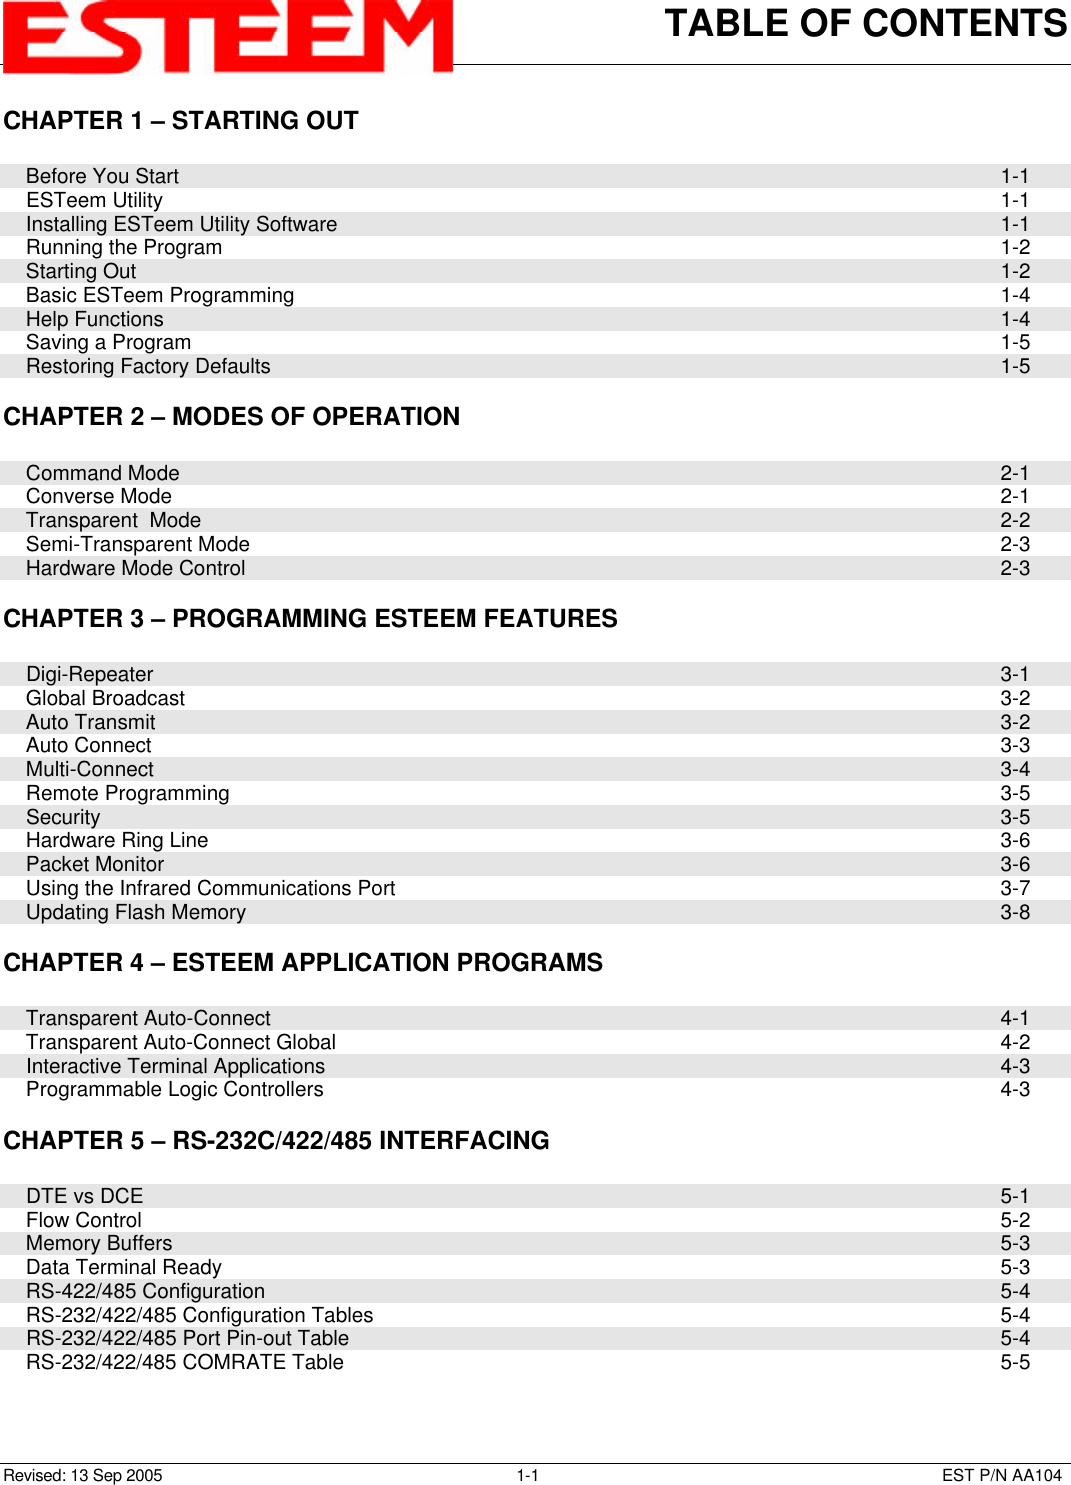 TABLE OF CONTENTSRevised: 13 Sep 2005 1-1 EST P/N AA104CHAPTER 1 – STARTING OUT    Before You Start 1-1    ESTeem Utility 1-1    Installing ESTeem Utility Software 1-1    Running the Program 1-2    Starting Out 1-2    Basic ESTeem Programming 1-4    Help Functions 1-4    Saving a Program 1-5    Restoring Factory Defaults 1-5CHAPTER 2 – MODES OF OPERATION    Command Mode 2-1    Converse Mode 2-1    Transparent  Mode 2-2    Semi-Transparent Mode 2-3    Hardware Mode Control 2-3CHAPTER 3 – PROGRAMMING ESTEEM FEATURES    Digi-Repeater 3-1    Global Broadcast 3-2    Auto Transmit 3-2    Auto Connect 3-3    Multi-Connect 3-4    Remote Programming 3-5    Security 3-5    Hardware Ring Line 3-6    Packet Monitor 3-6    Using the Infrared Communications Port 3-7    Updating Flash Memory 3-8CHAPTER 4 – ESTEEM APPLICATION PROGRAMS    Transparent Auto-Connect 4-1    Transparent Auto-Connect Global 4-2    Interactive Terminal Applications 4-3    Programmable Logic Controllers 4-3CHAPTER 5 – RS-232C/422/485 INTERFACING    DTE vs DCE 5-1    Flow Control 5-2    Memory Buffers 5-3    Data Terminal Ready 5-3    RS-422/485 Configuration 5-4    RS-232/422/485 Configuration Tables 5-4    RS-232/422/485 Port Pin-out Table 5-4    RS-232/422/485 COMRATE Table 5-5